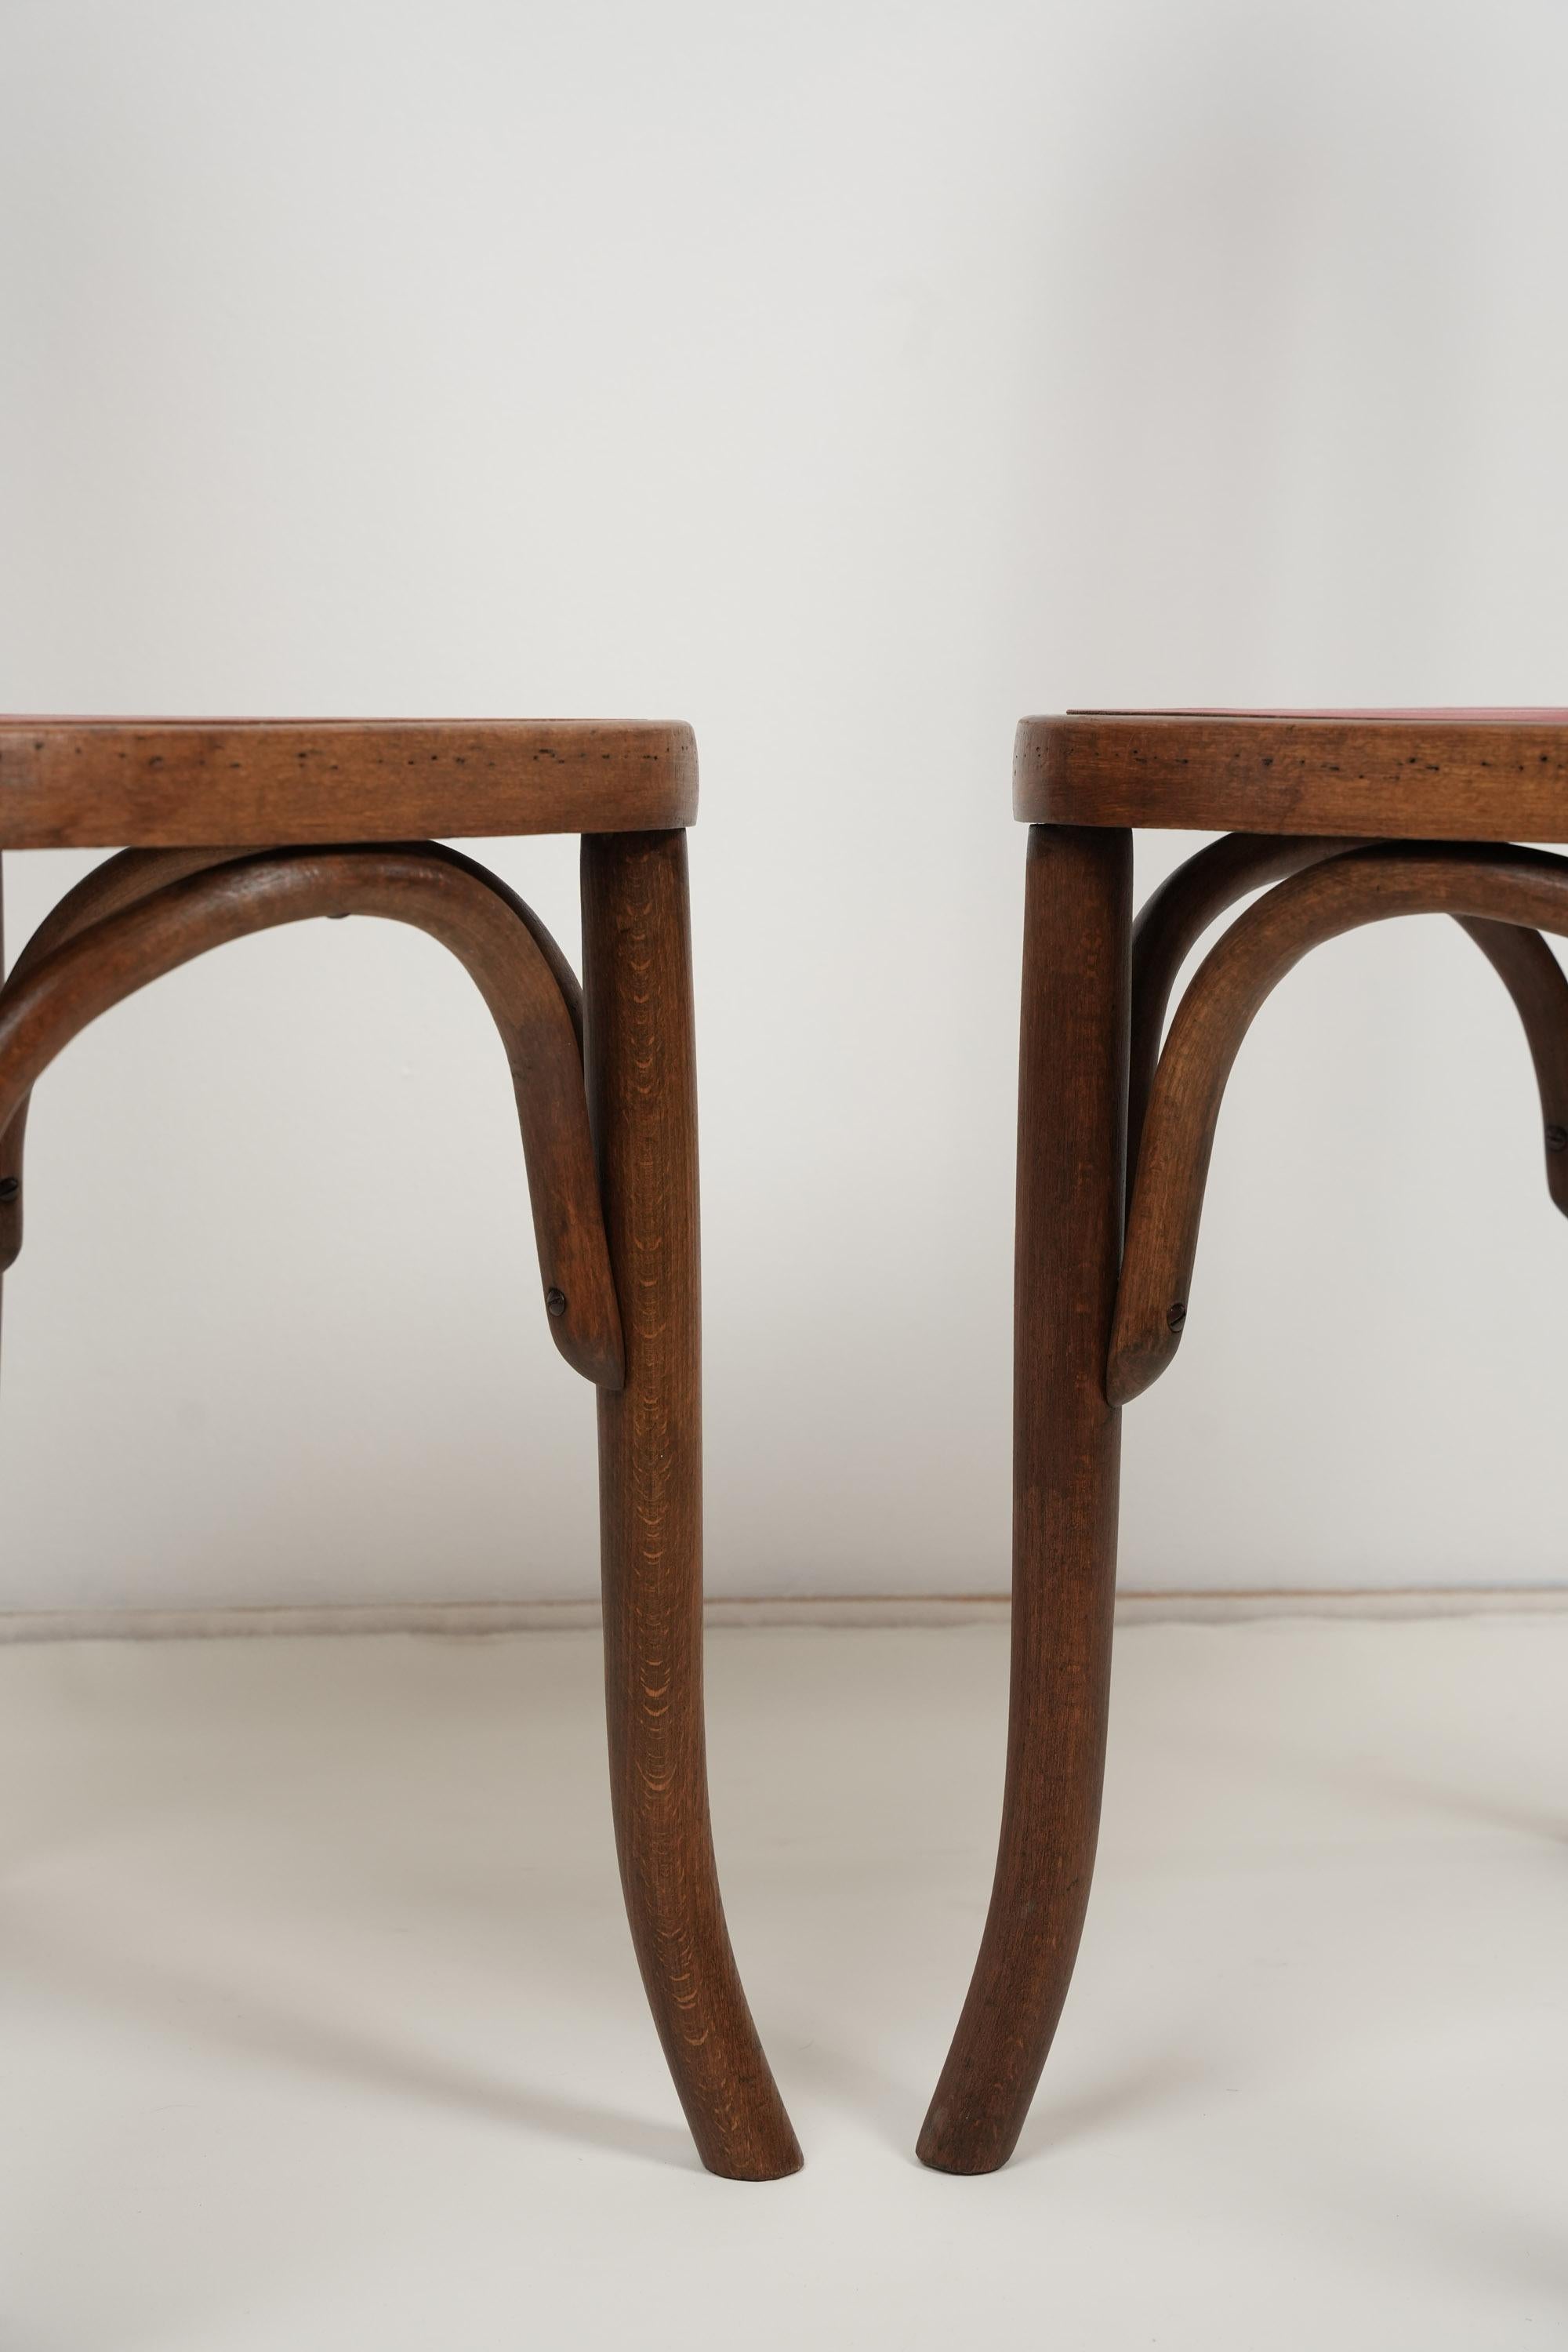 Josef Hoffmann Chairs Set of Two Austria 1905 In Good Condition For Sale In Čelinac, BA